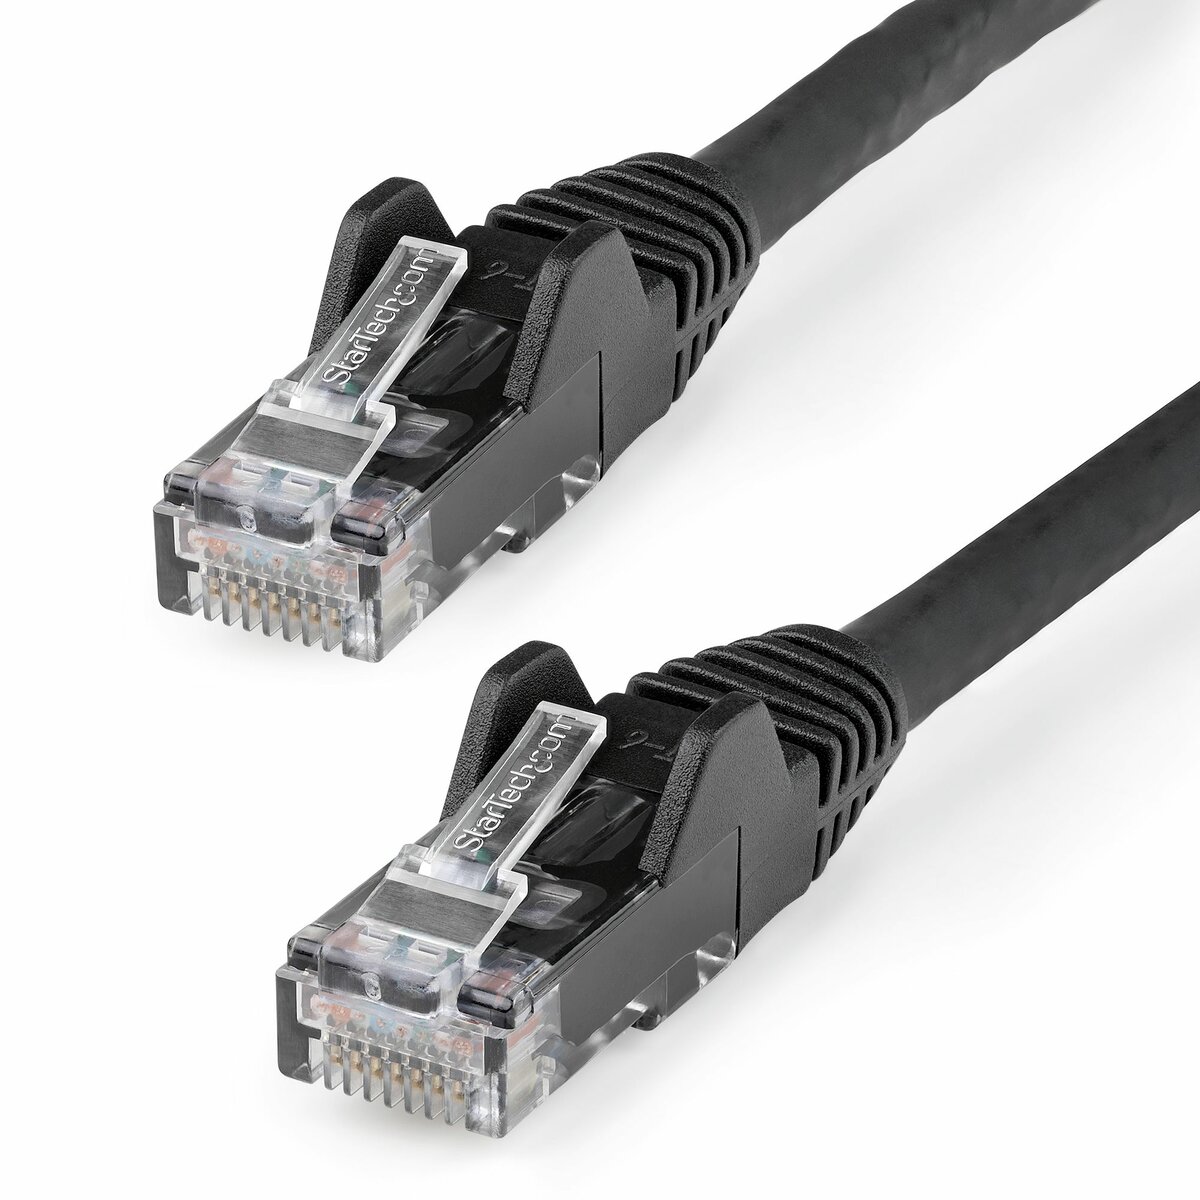 StarTech.com 6ft (1.8m) LSZH CAT6 Ethernet Cable - 10 Gigabit Snagless RJ45  100W PoE Patch Cord - CAT 6 10GbE UTP Network Cable w/Strain Relief 